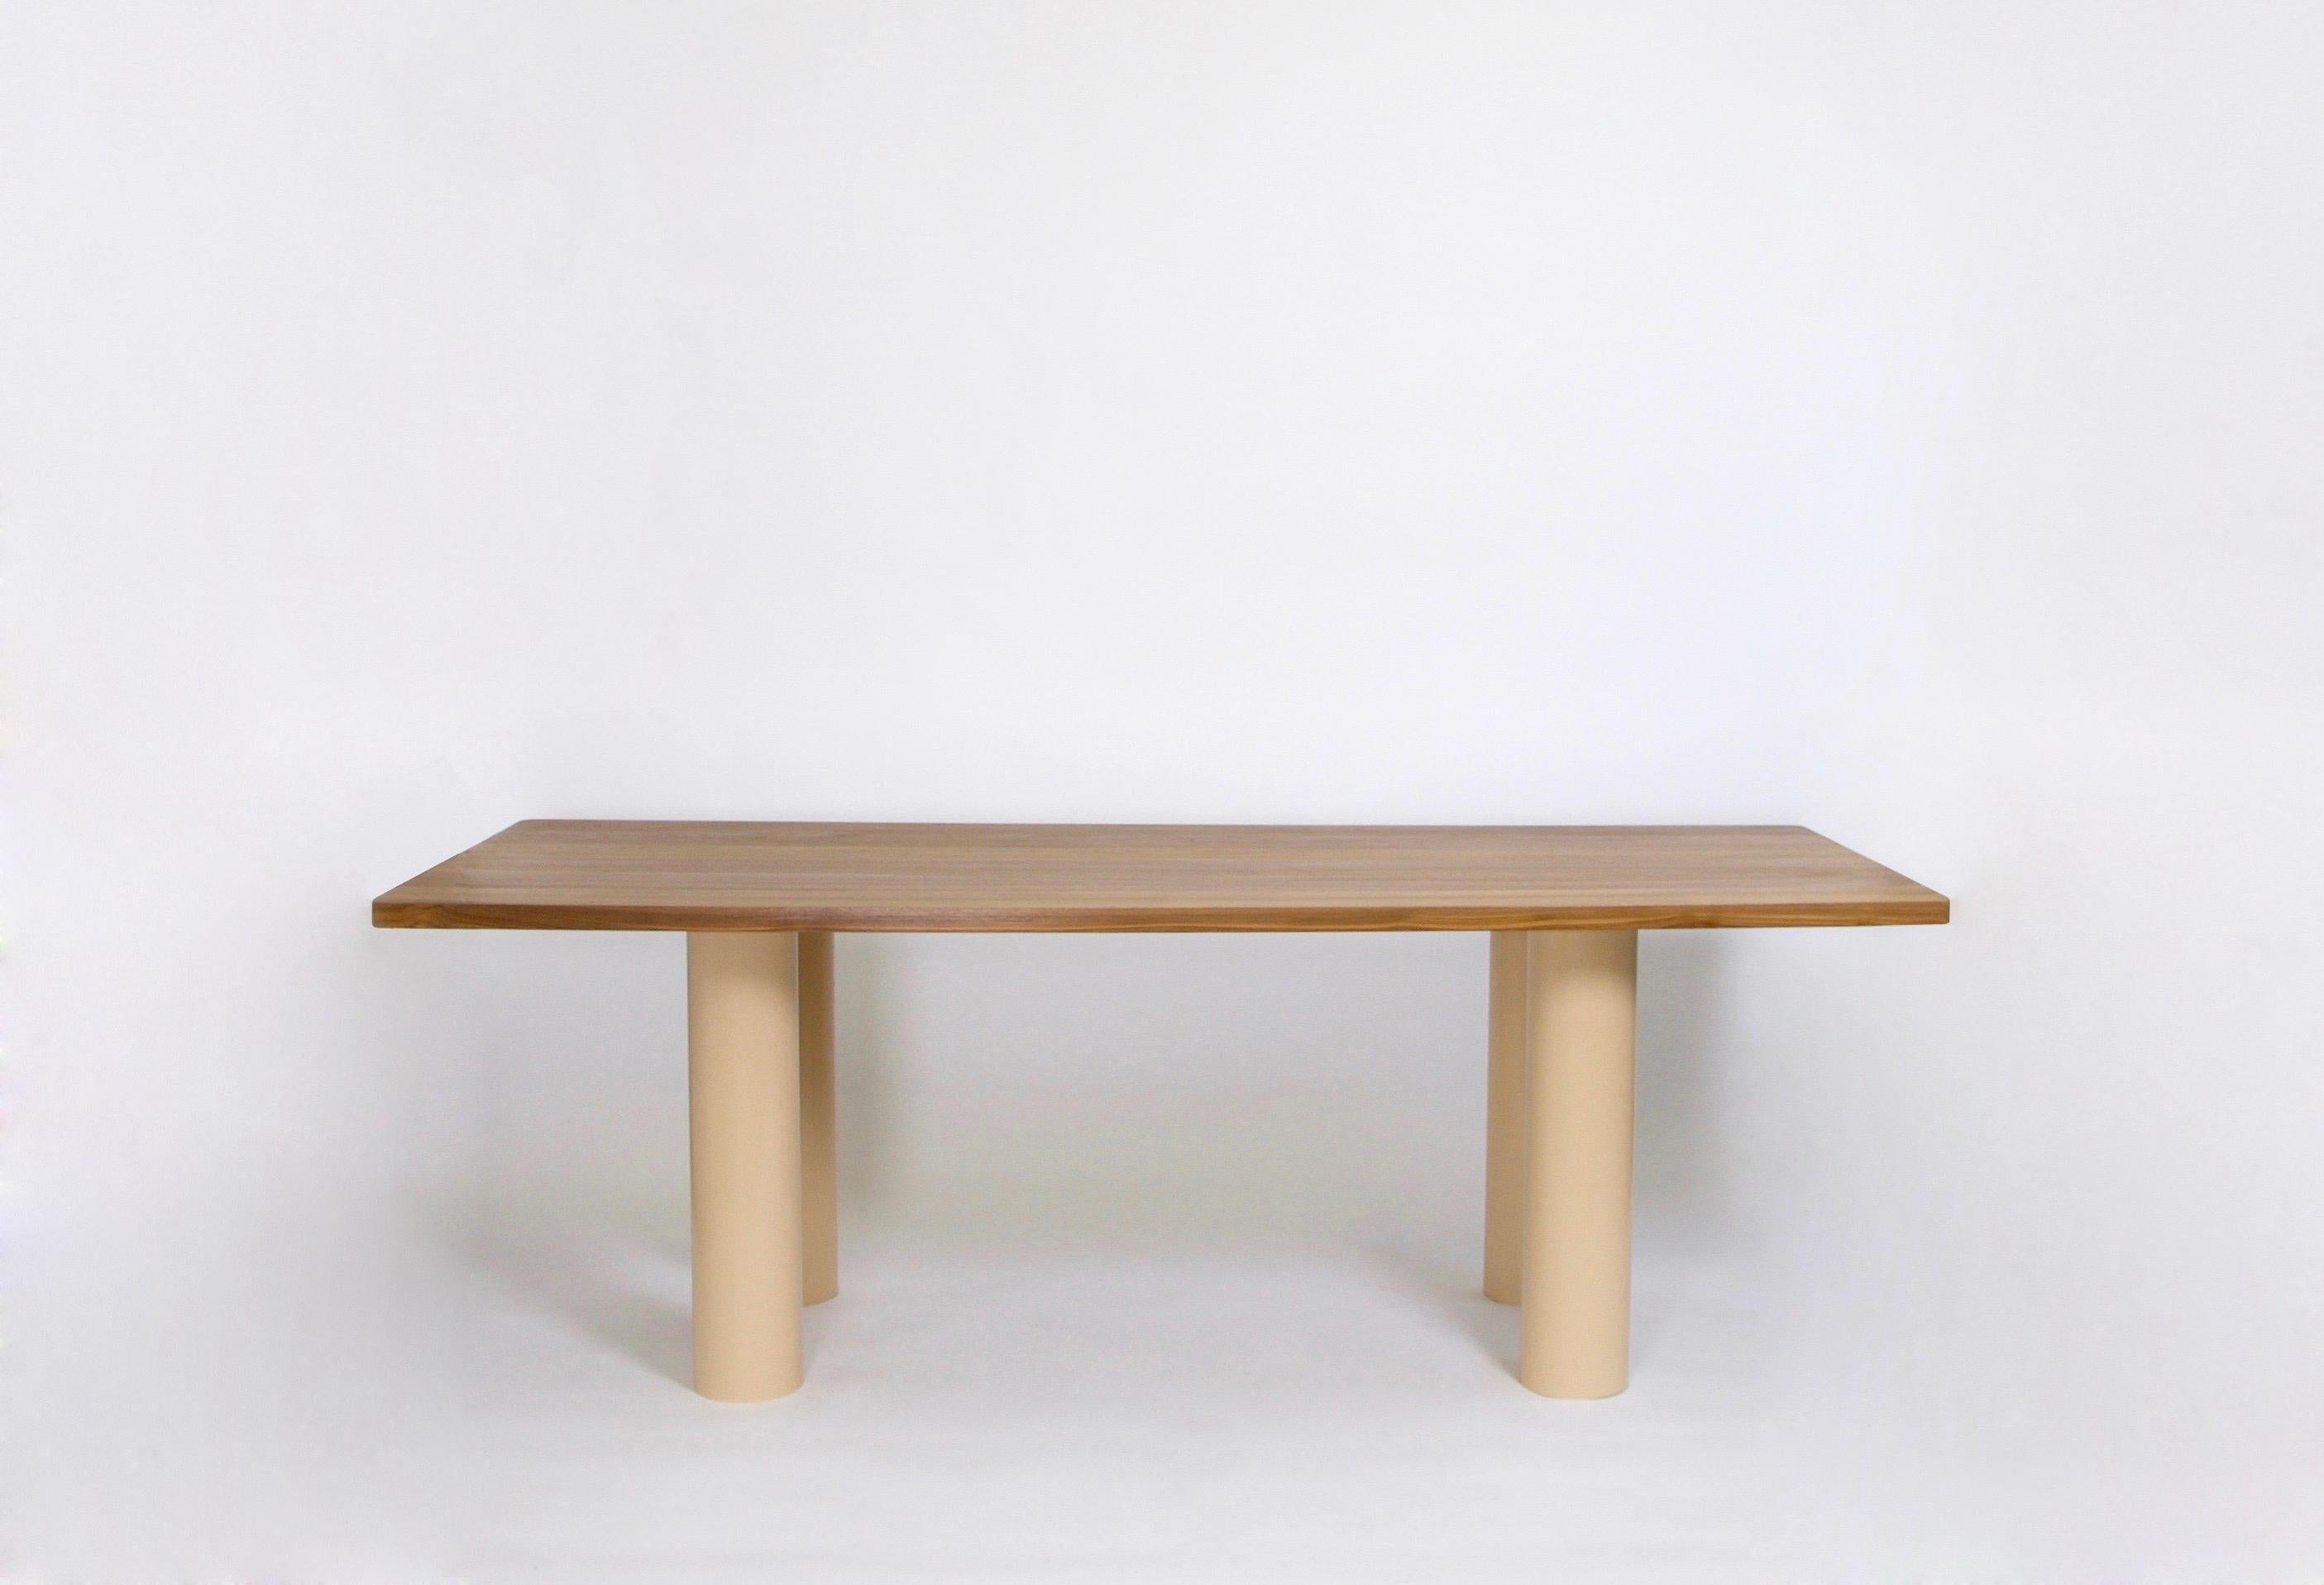 Tabula dining table by Helder Barbosa
Materials: Teak, steel
Dimensions: 220 x 85 x 74 cm
 Diameter: 16 cm

Trained as a craftsman (école Boulle, 2014), Helder Barbosa is a designer who lives and works in Paris.
Attracted by minimalist shapes,